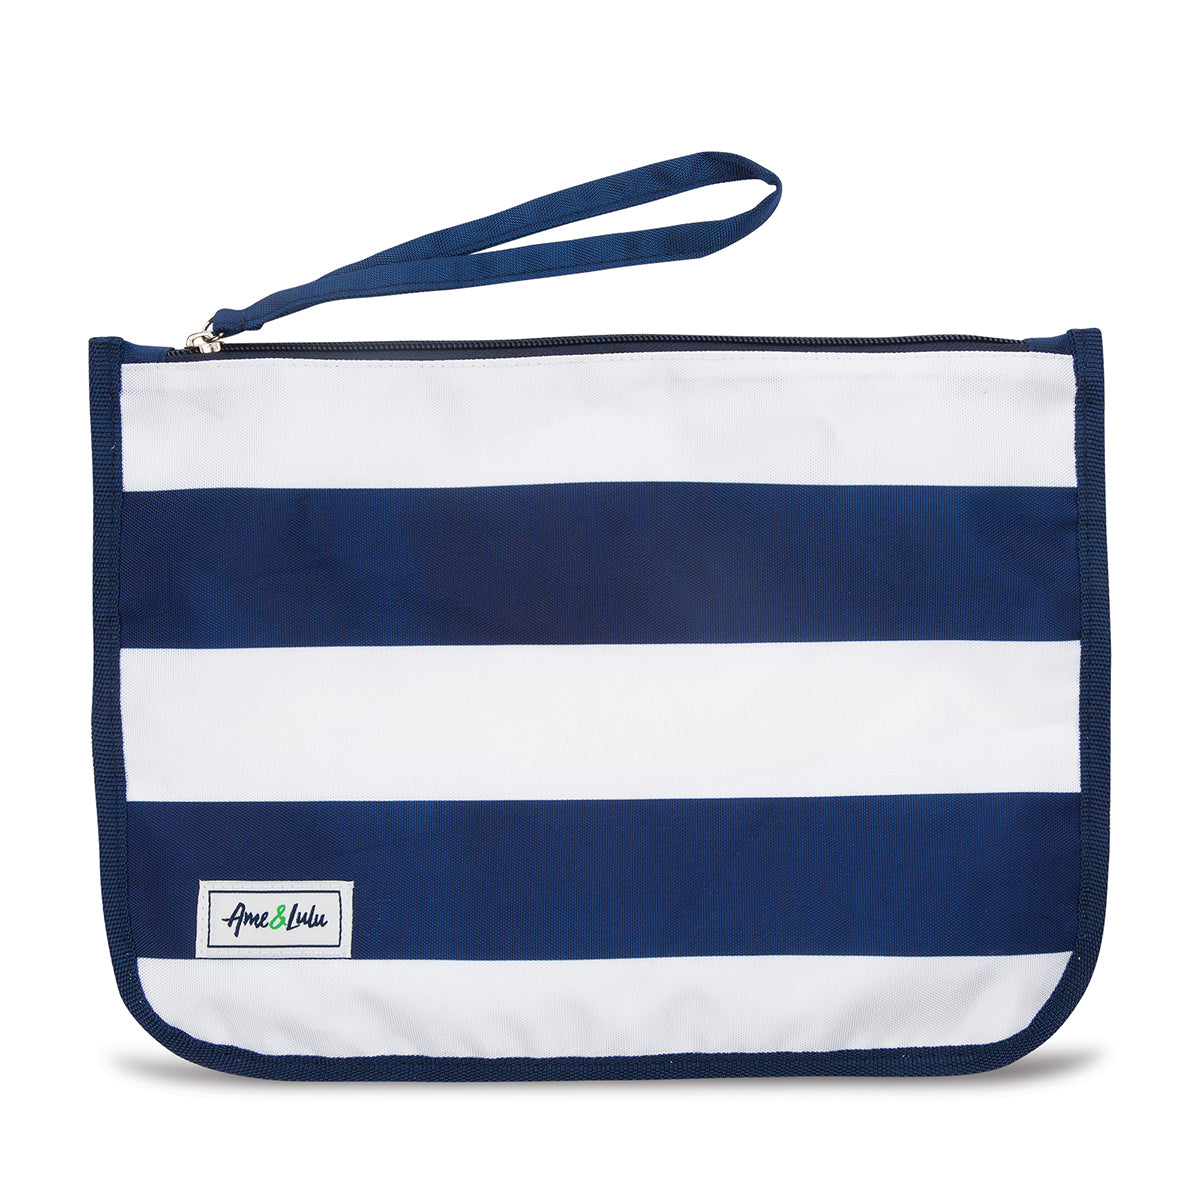 navy and white striped nylon zip pouch with wrist strap